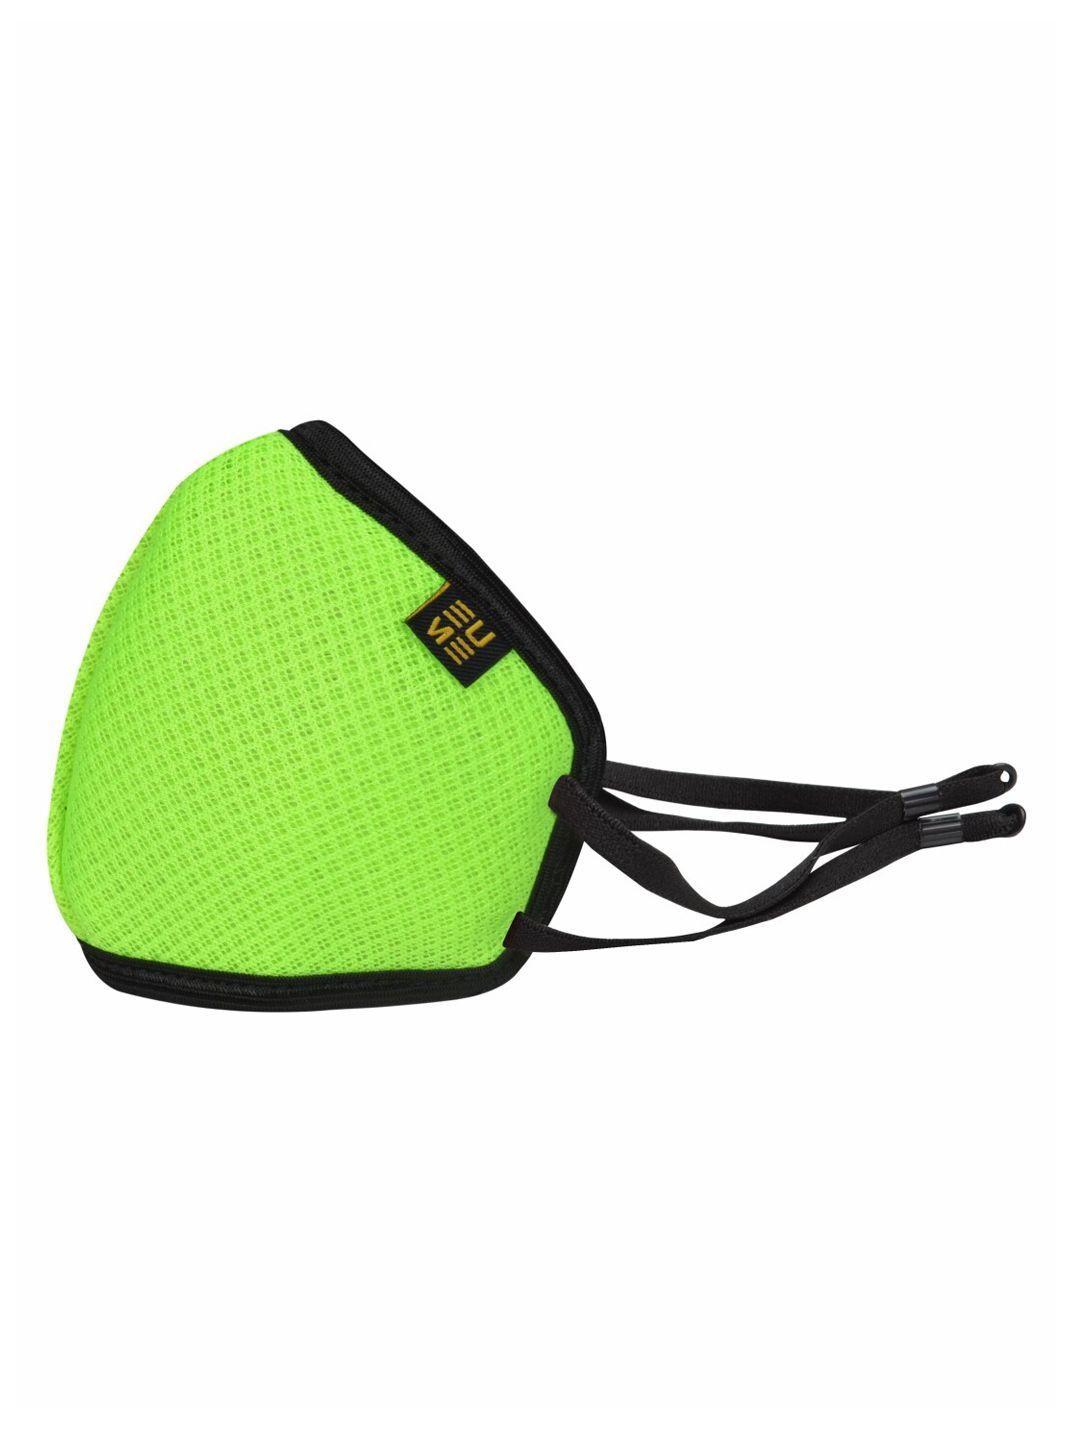 eume green protect+ 95 reusable and washable outdoor masks